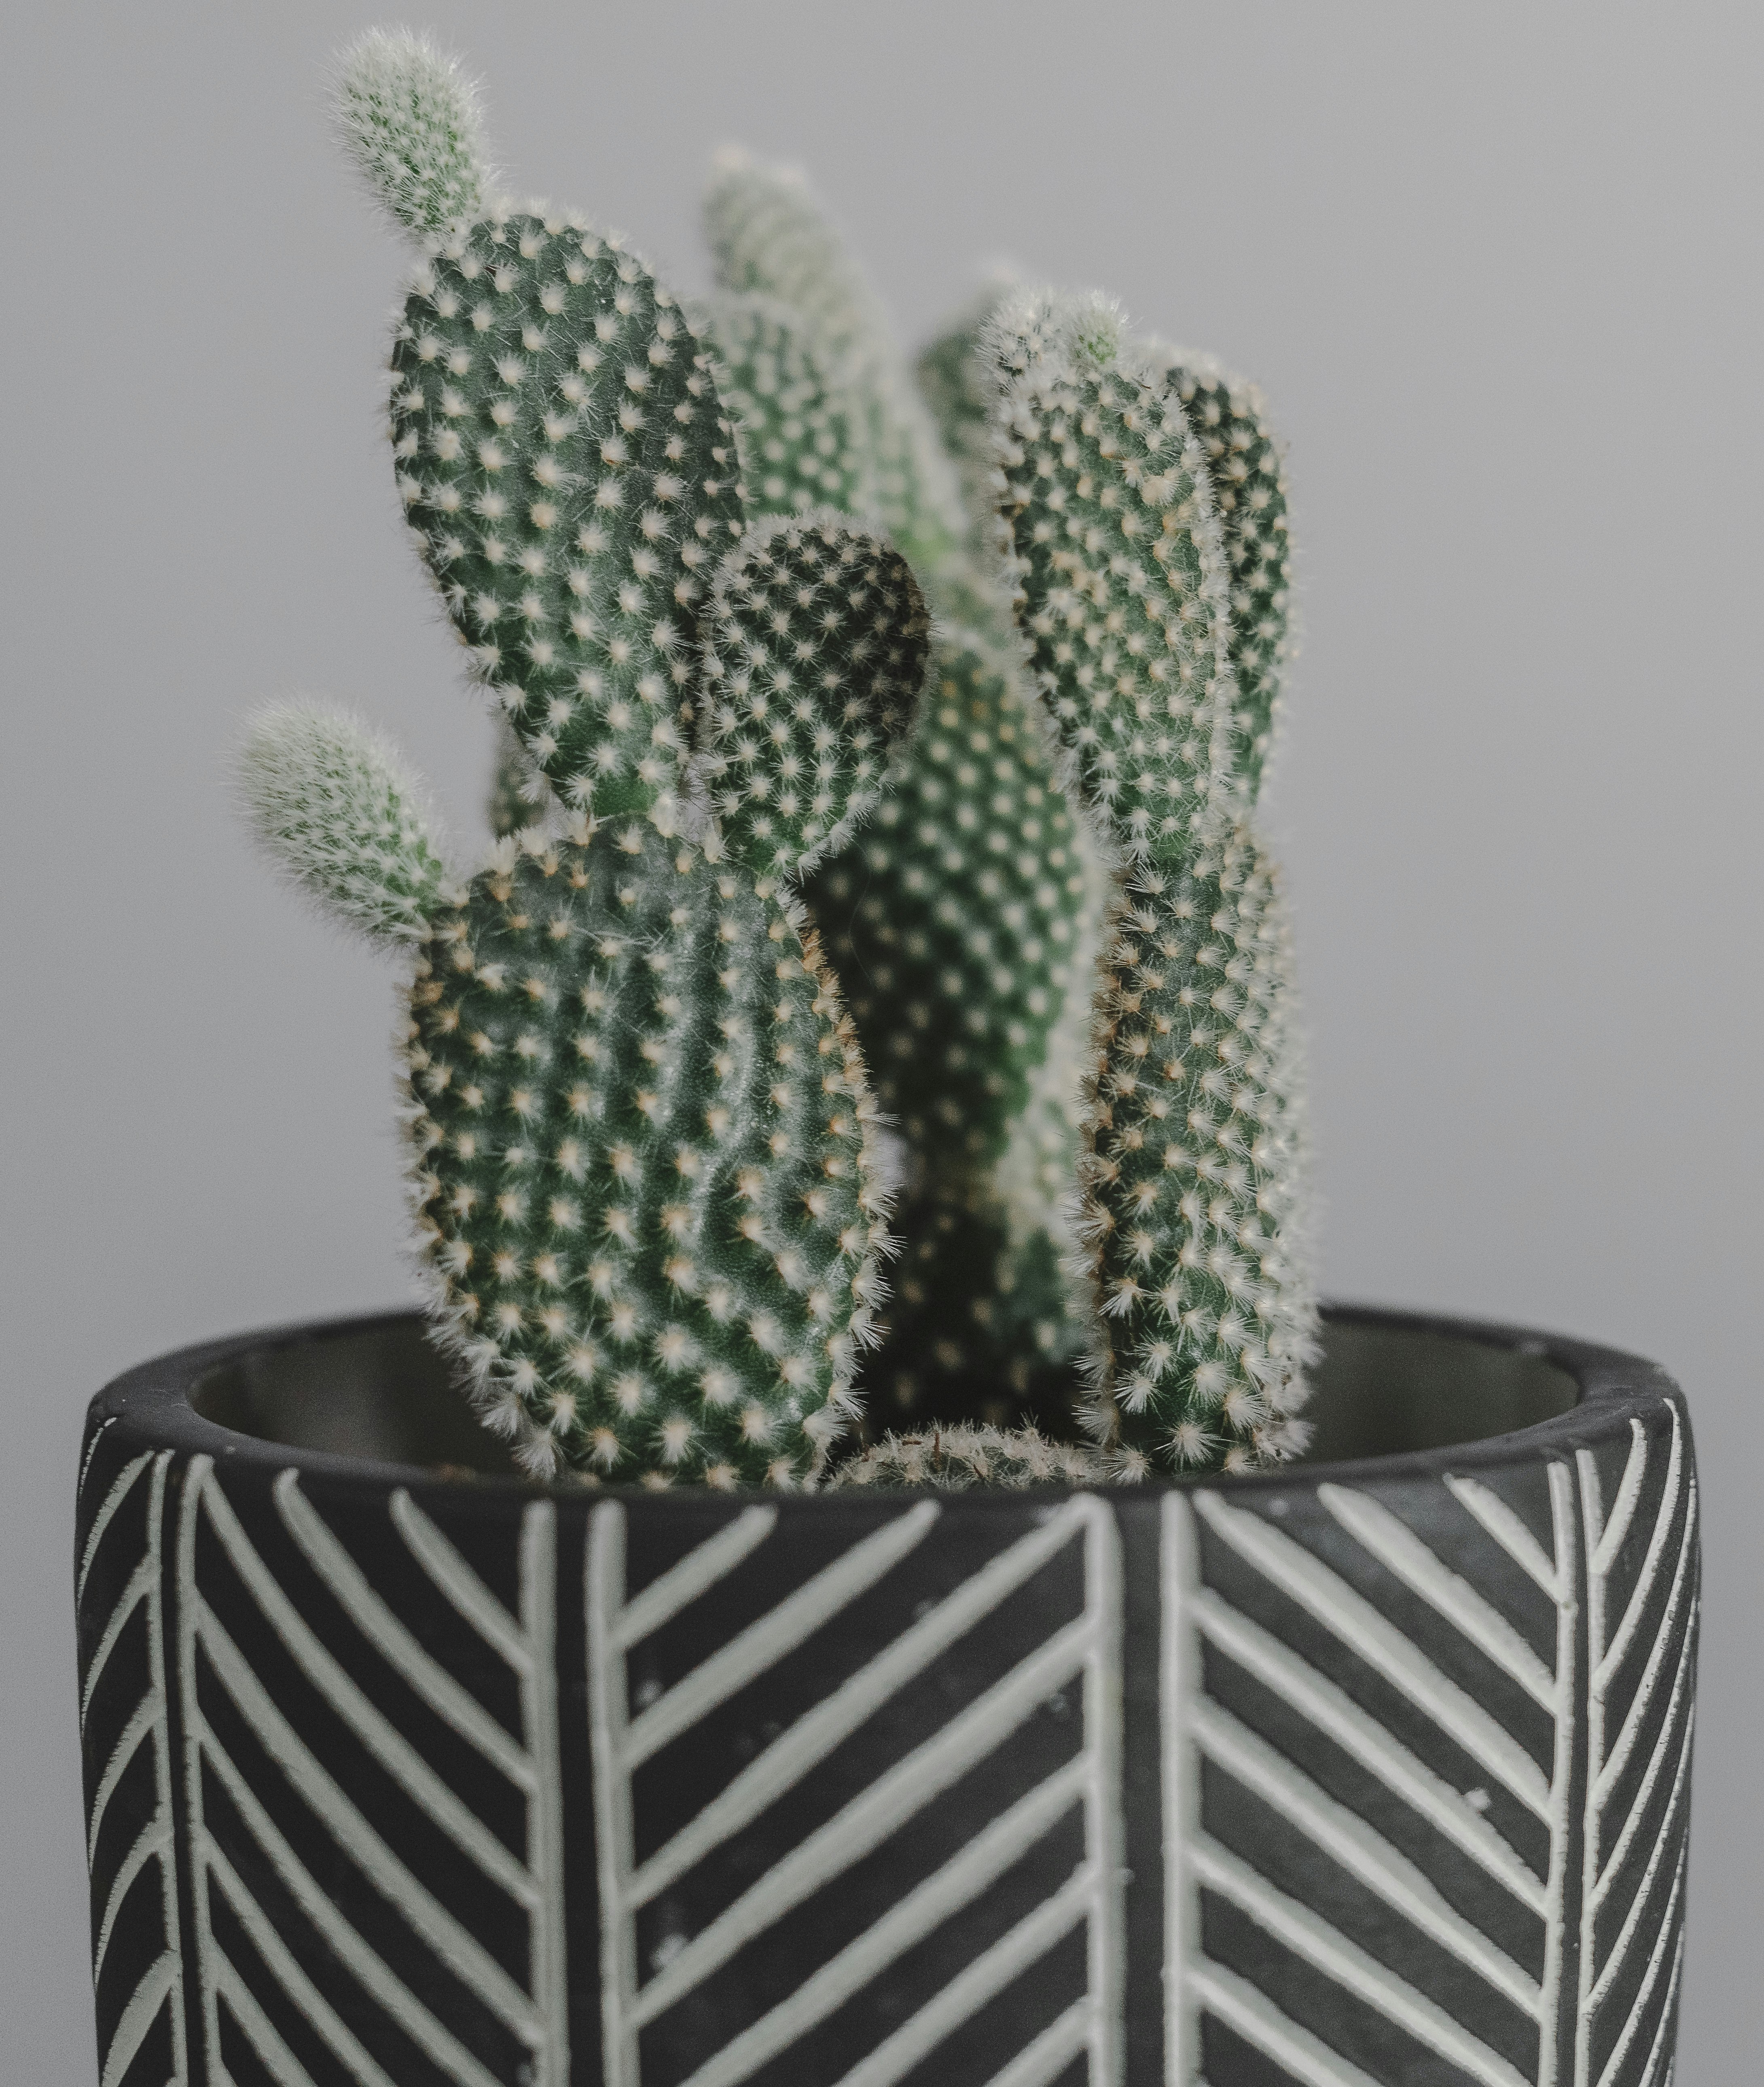 green cactus in black and white striped pot